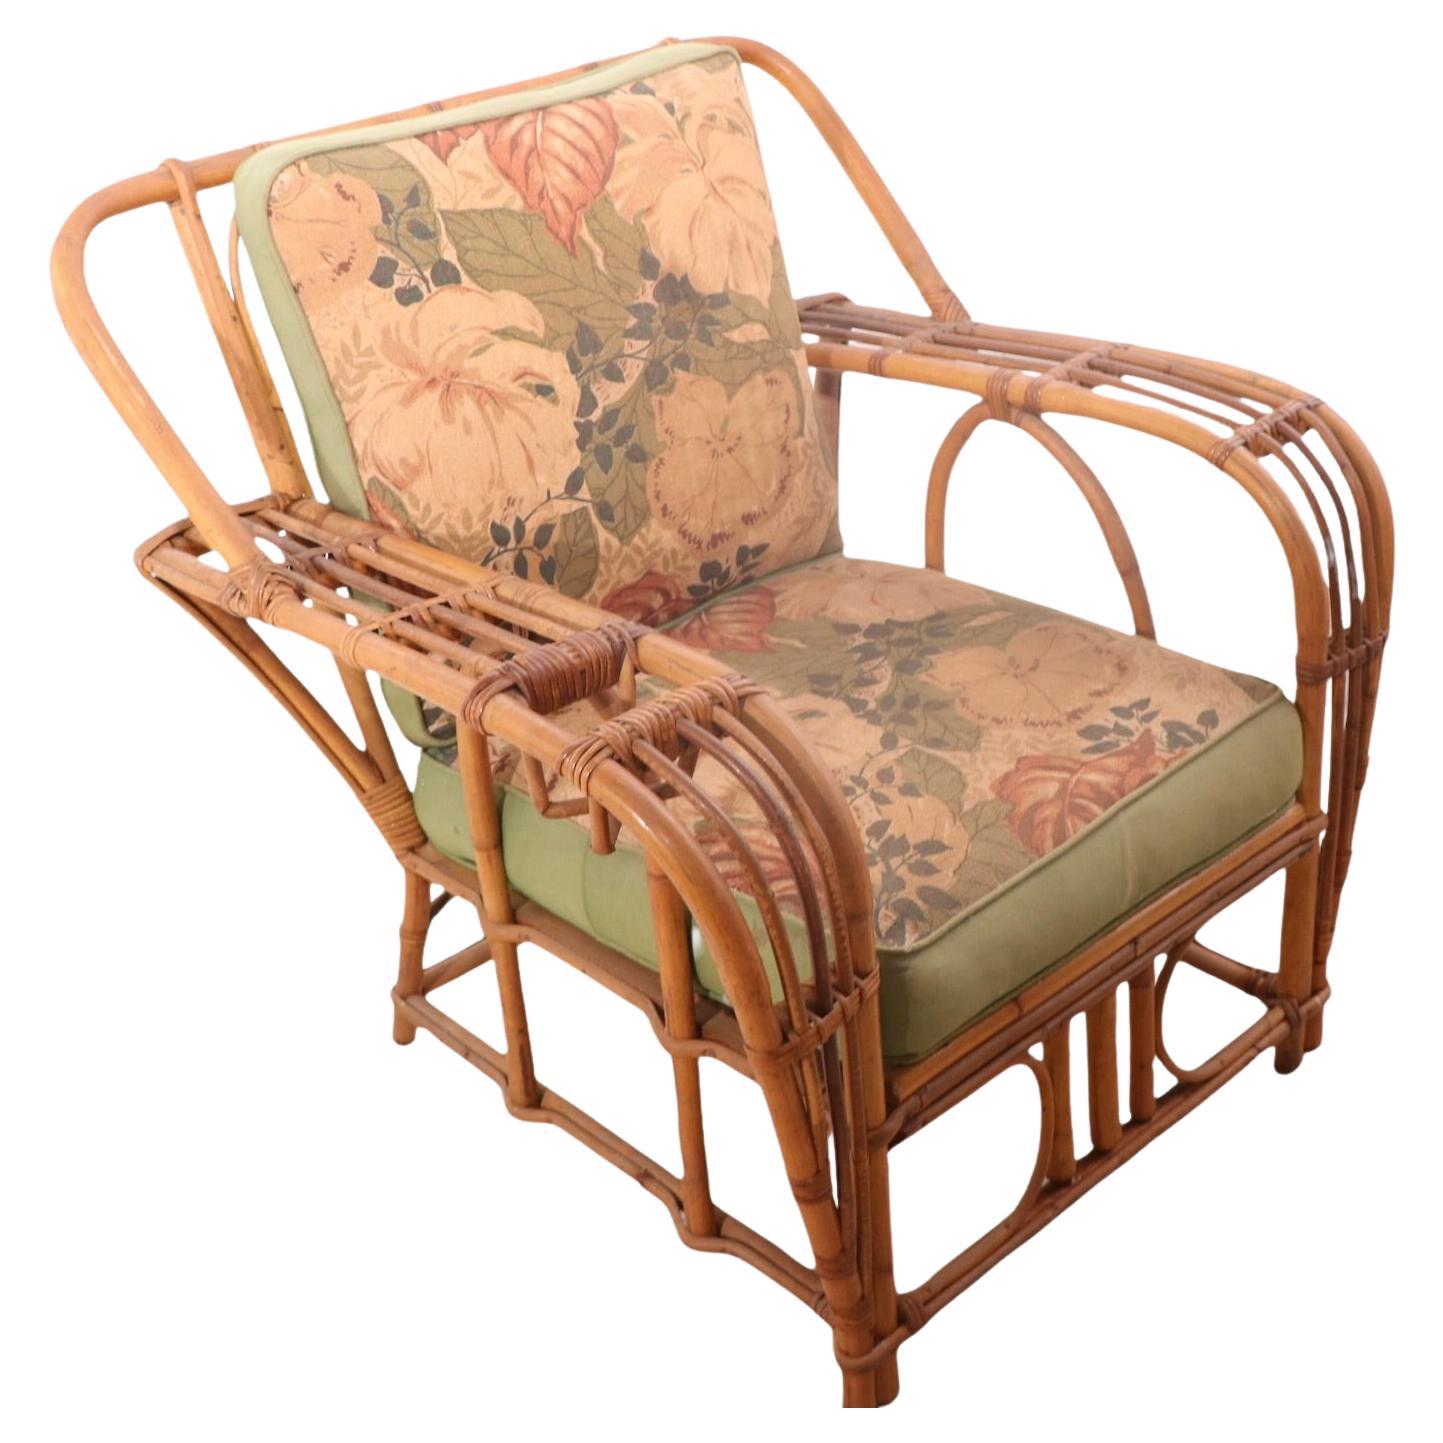 Bamboo Reed Lounge Chair with Drink Holder in Arm by Superior Reed and Rattan Co